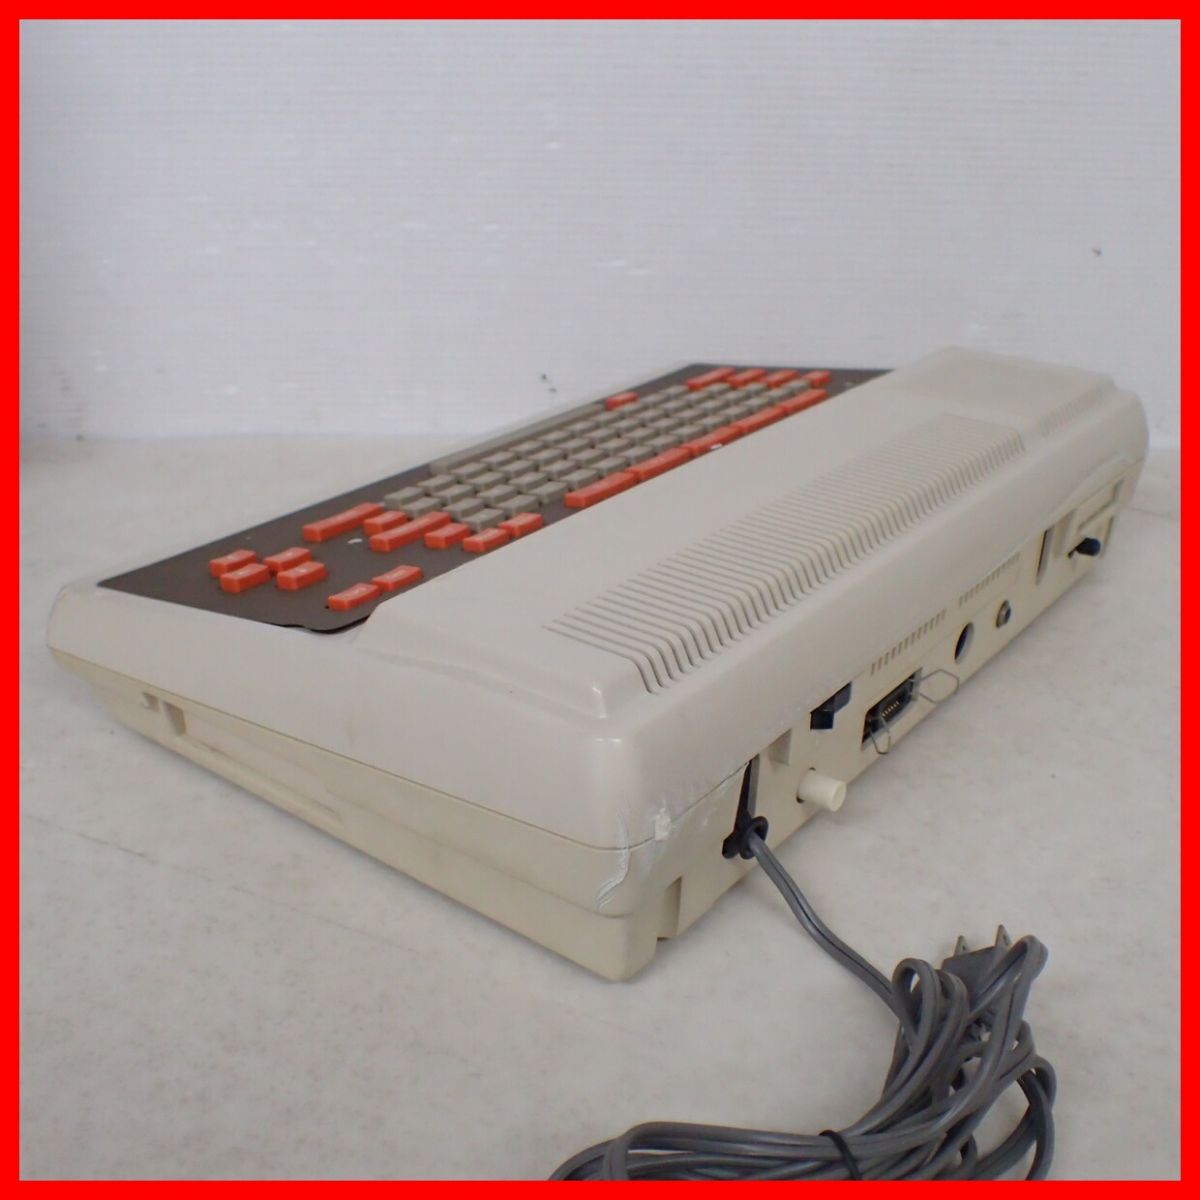 *NEC personal computer PC-6000 series PC-6001 body retro PC PC60 Japan electric box opinion demo tape attaching electrification only verification [40